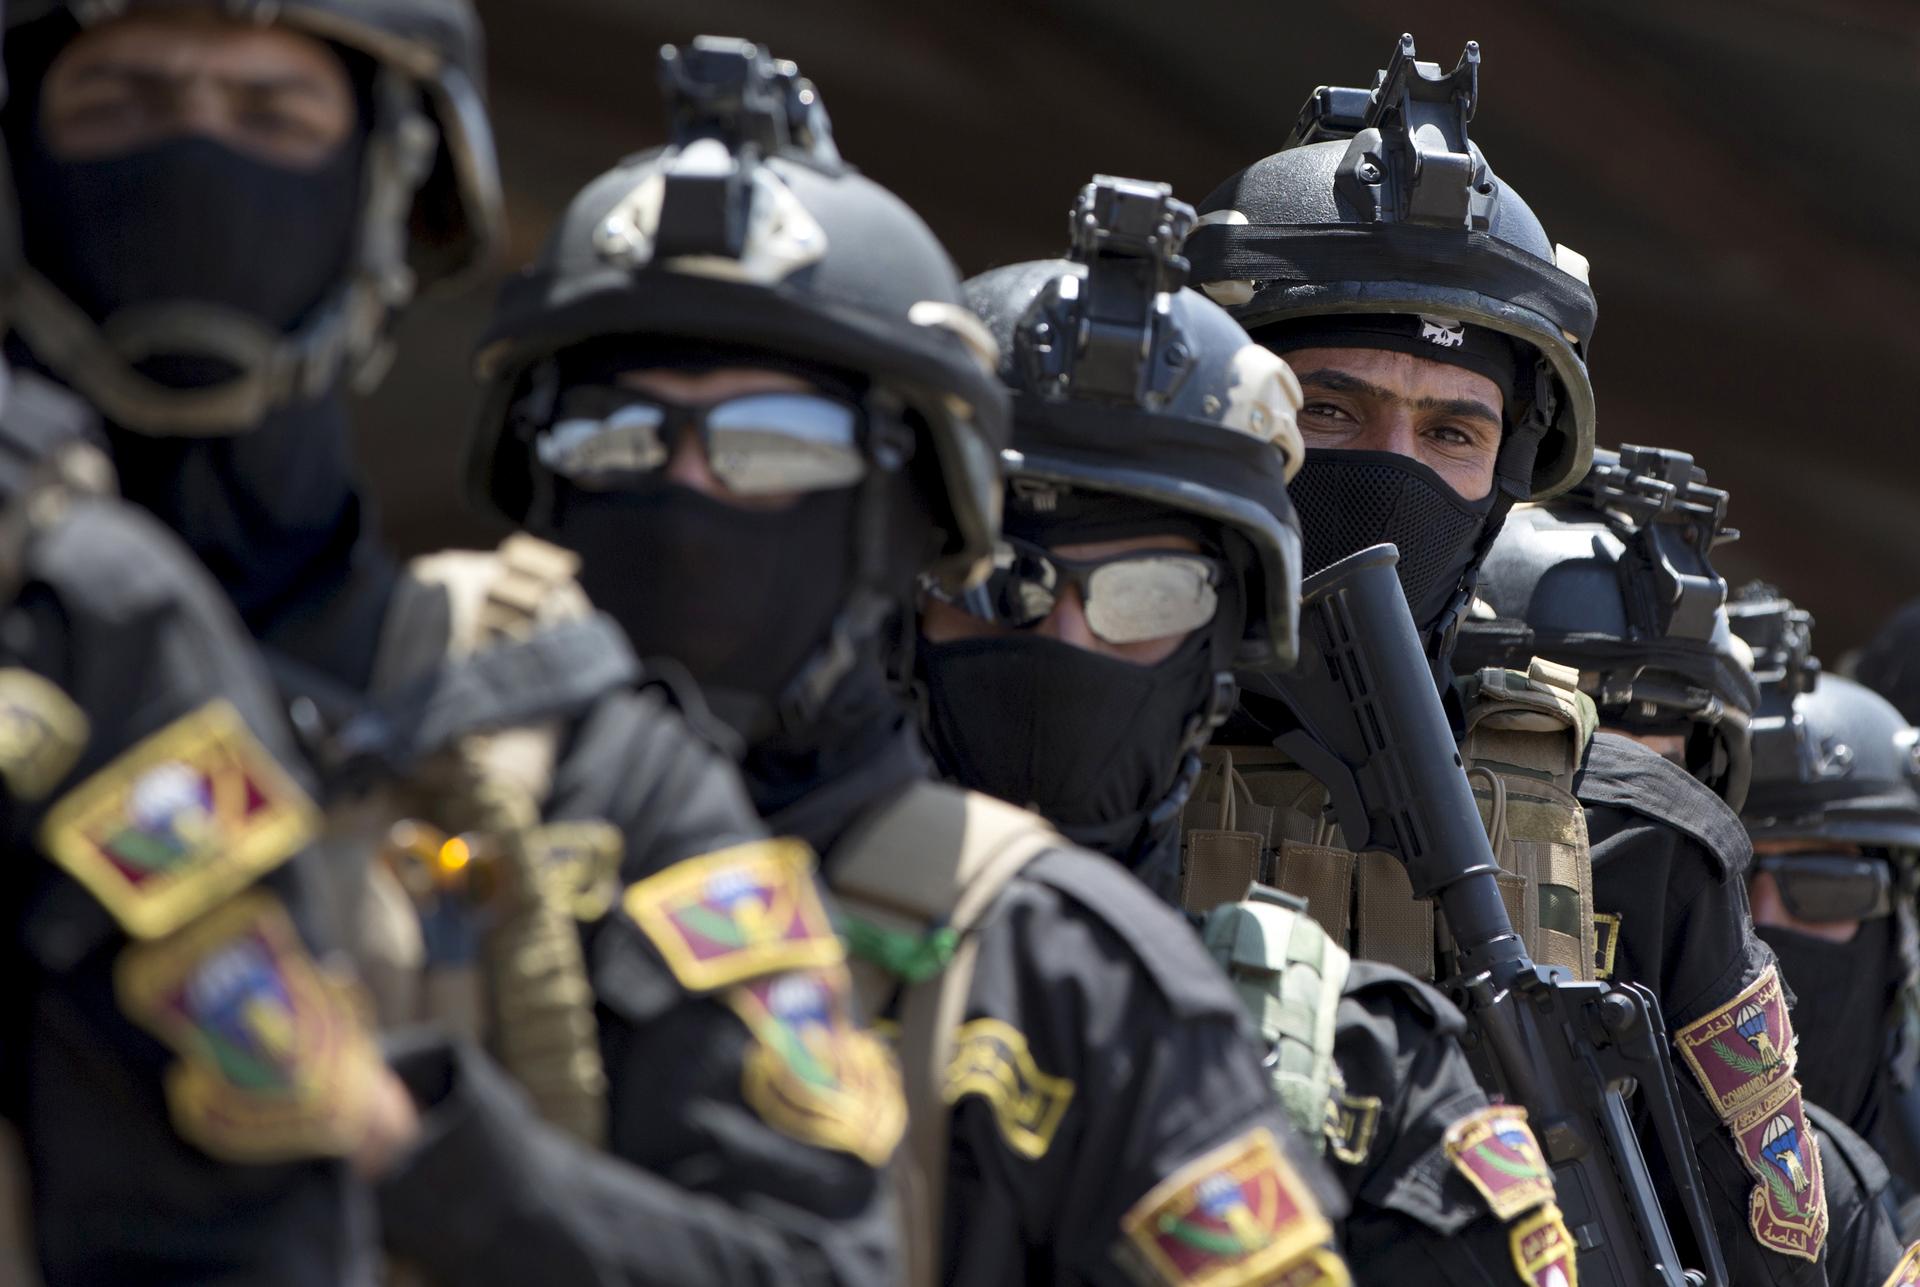 The Iraqi Counter Terrorism Service forces participate in a training exercise as U.S. Defense Secretary Ash Carter observes at the Iraqi Counter Terrorism Service Academy on the Baghdad Airport Complex in Baghdad, Iraq, July 23, 2015.